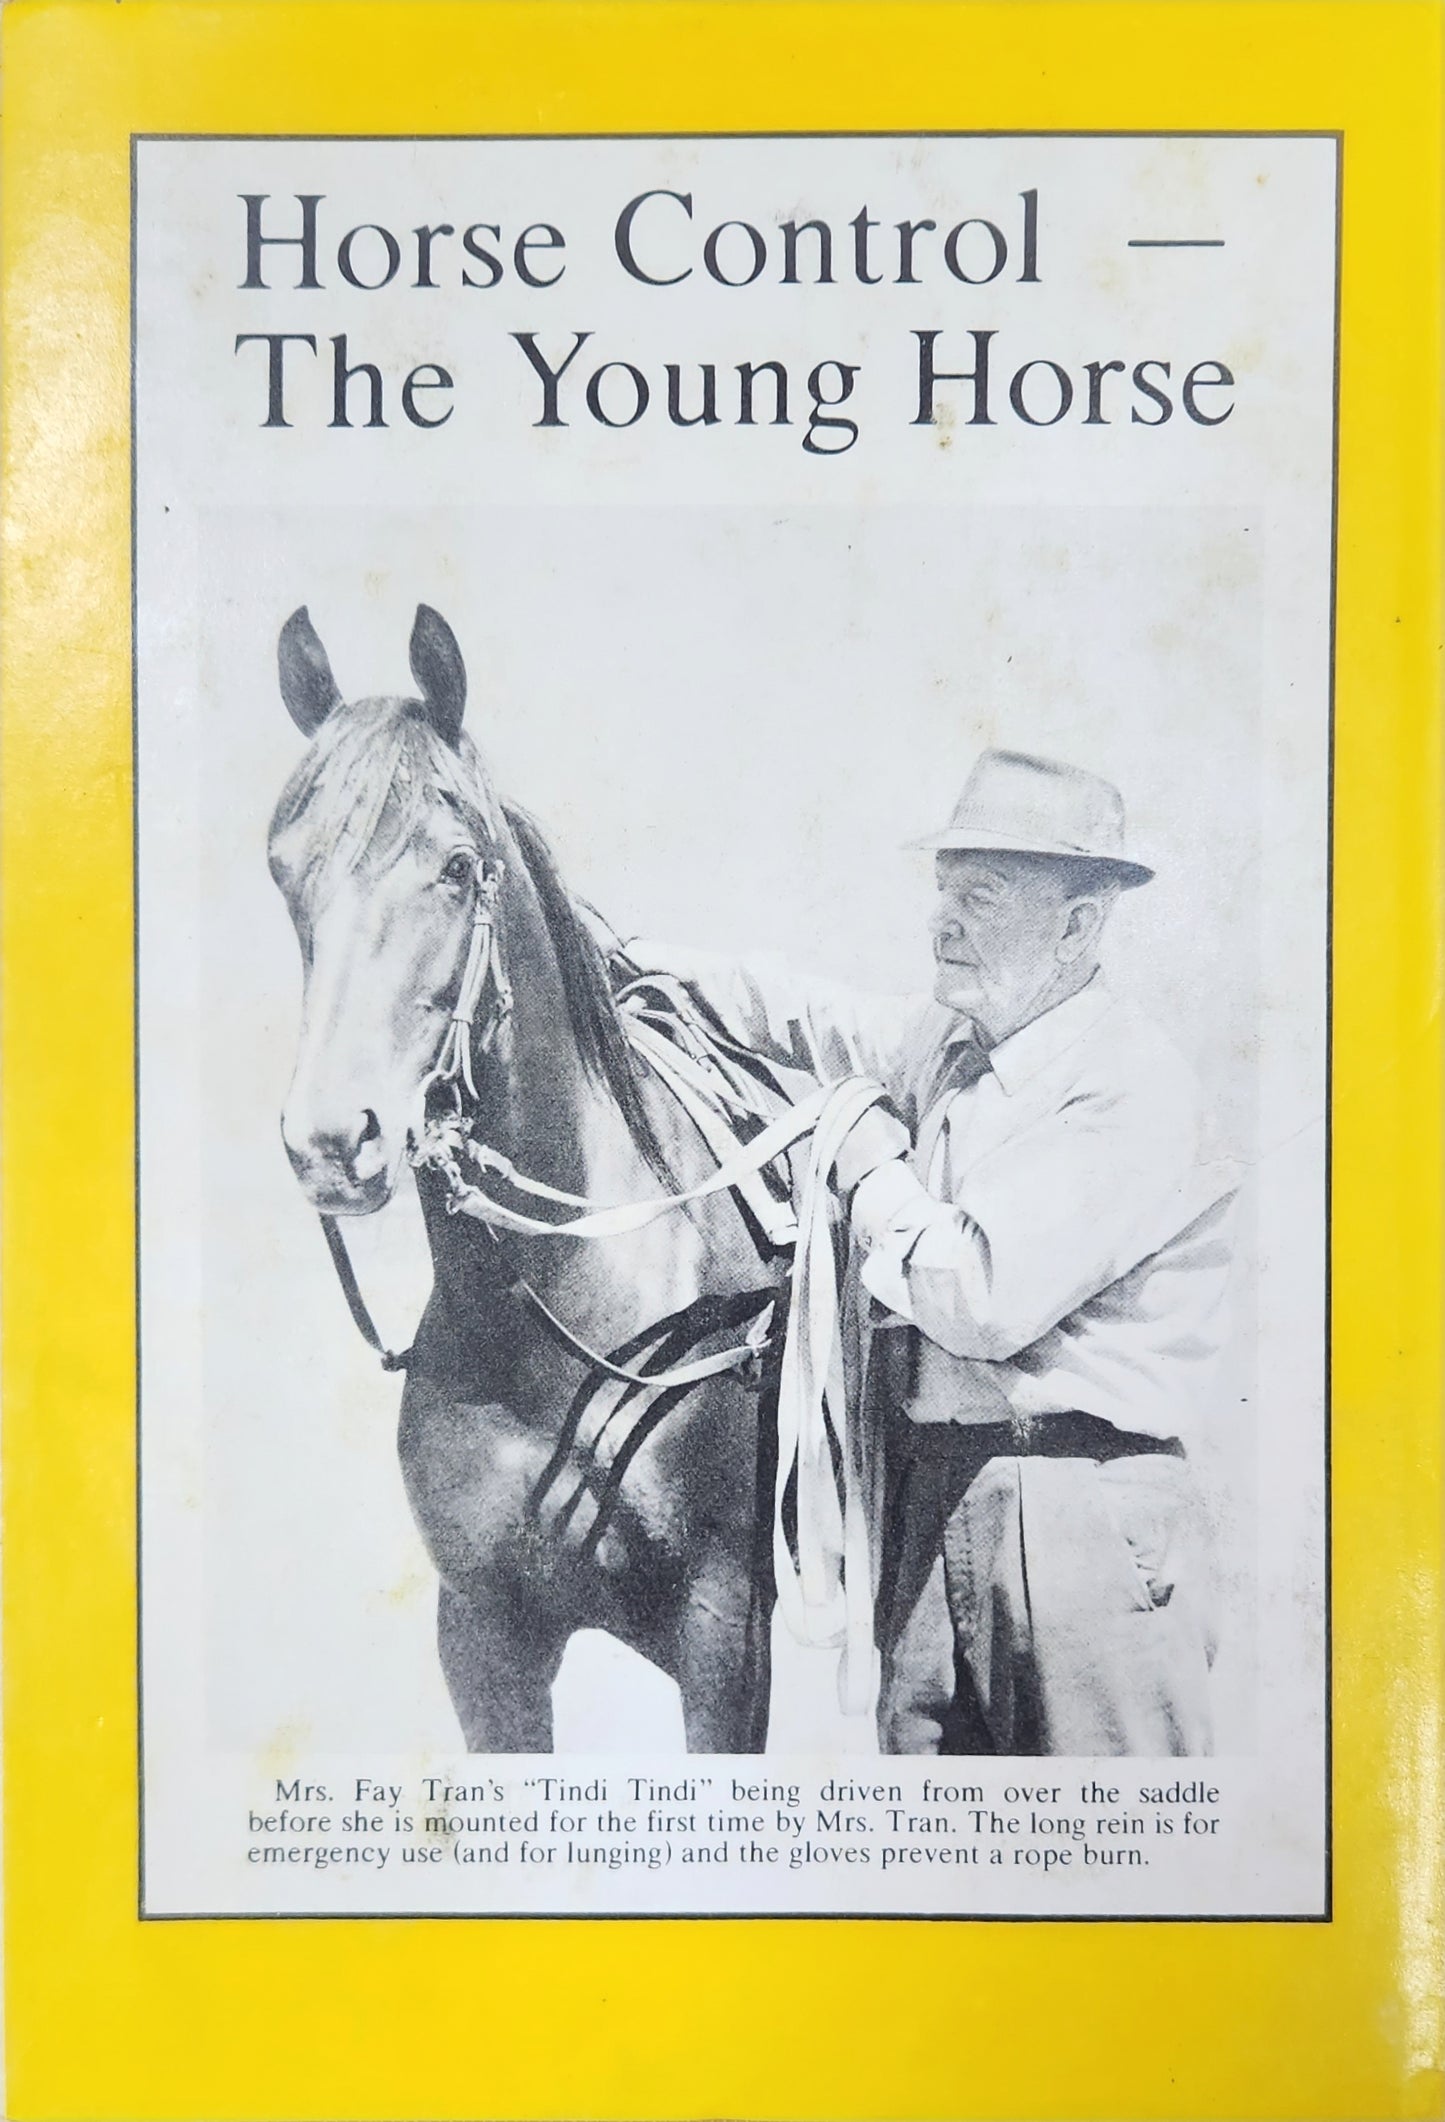 Horse Control: the Young Horse